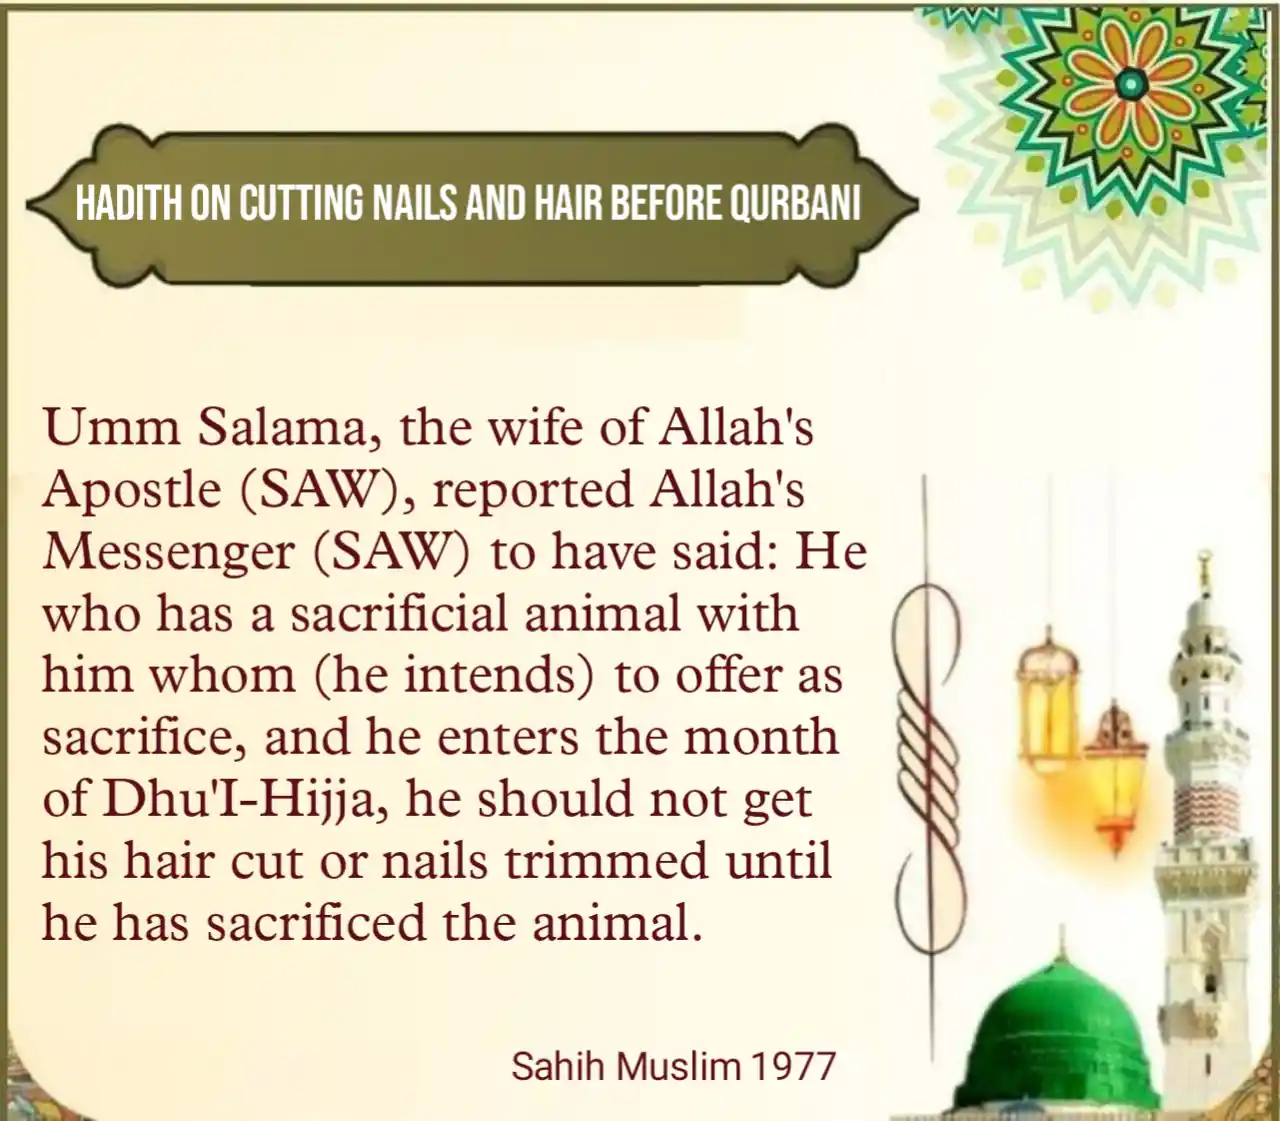 Hadith On Cutting Nails And Hair Before Qurbani